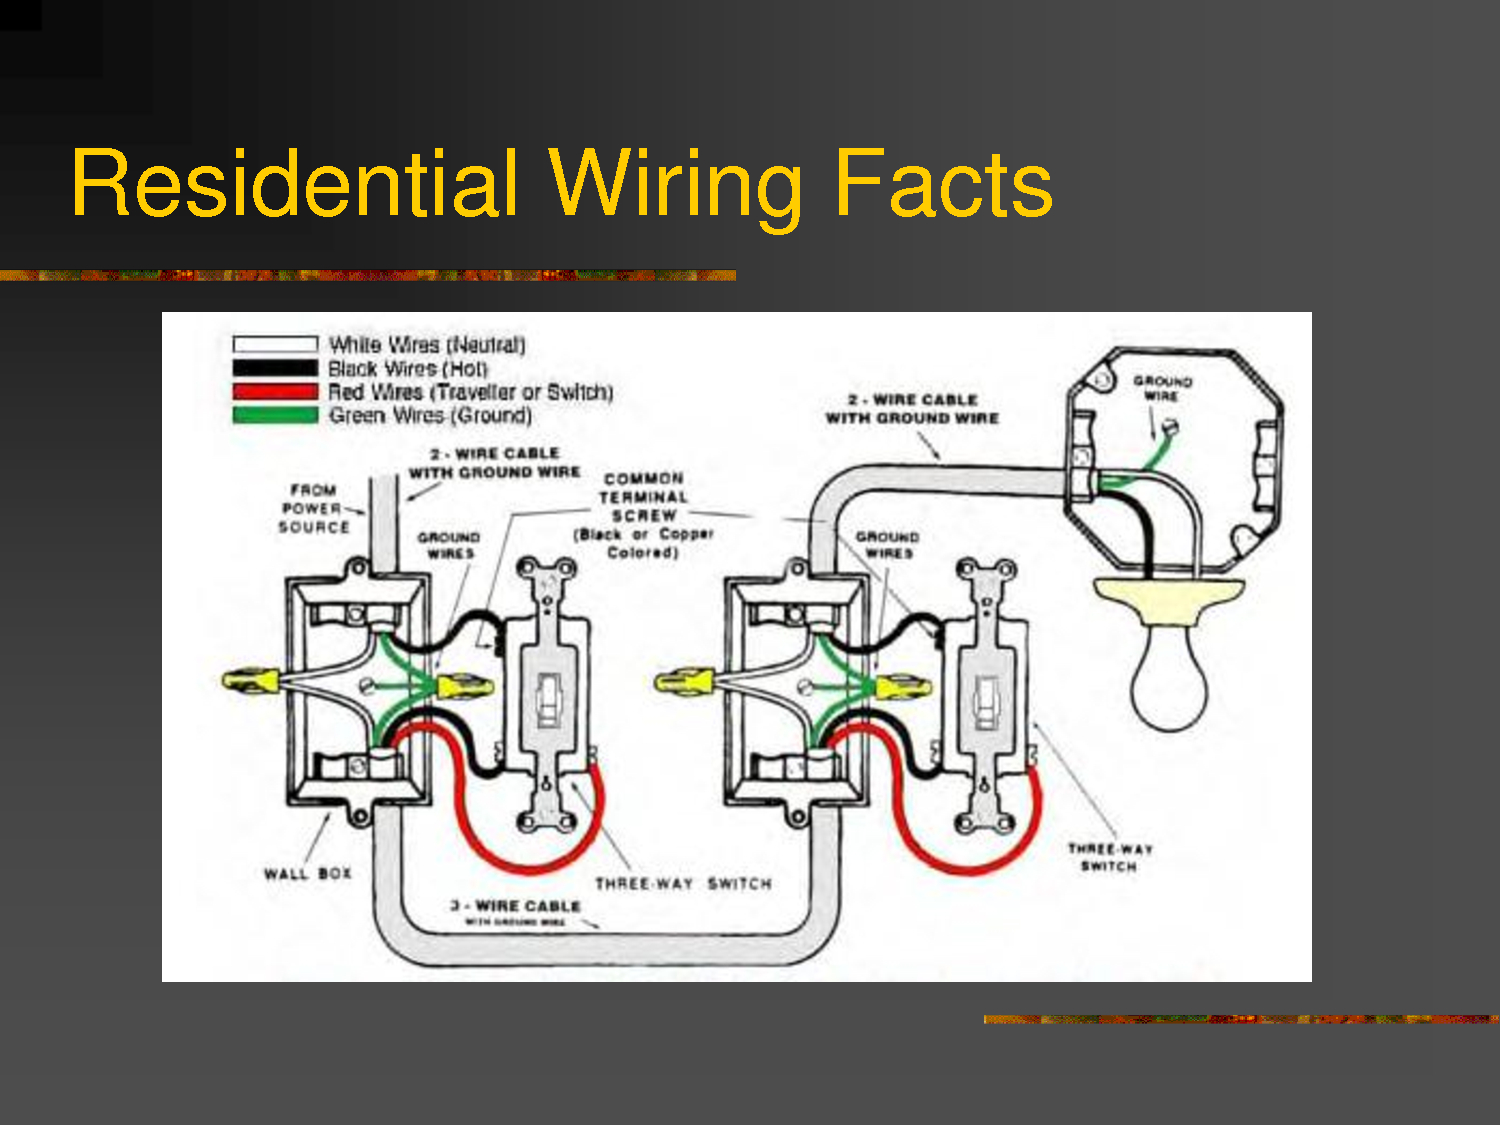 4 Best Images Of Residential Wiring Diagrams - House Electrical - Residential Wiring Diagram